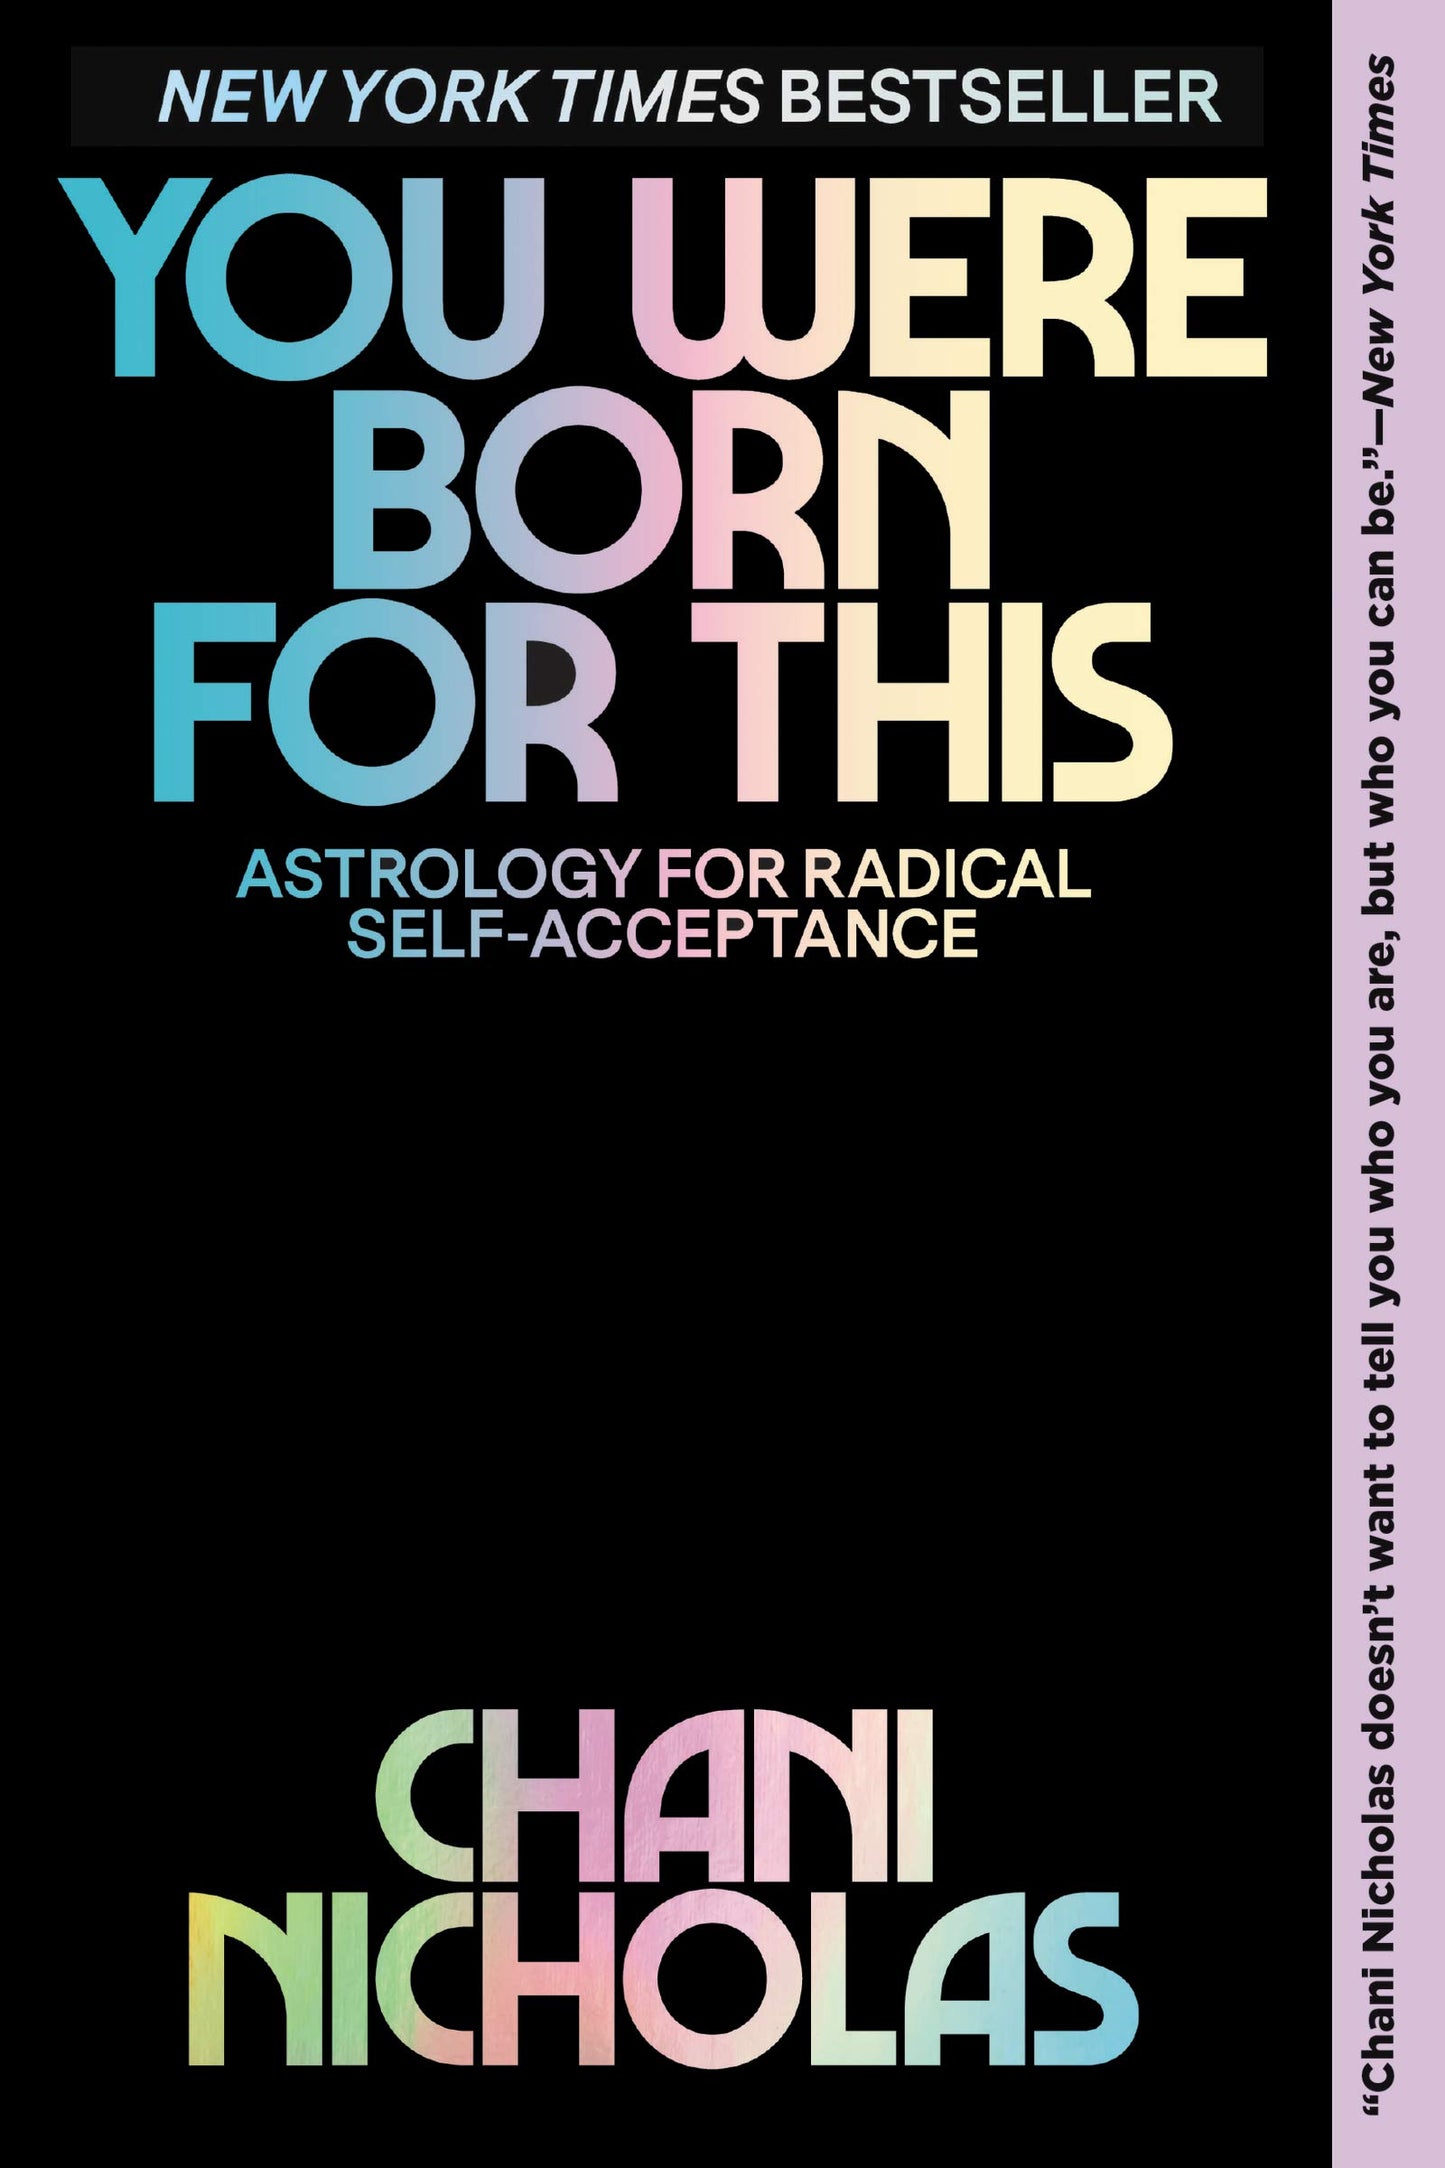 Book cover of You Were Born For This: Astrology for radical self-acceptance by Chani Nicholas